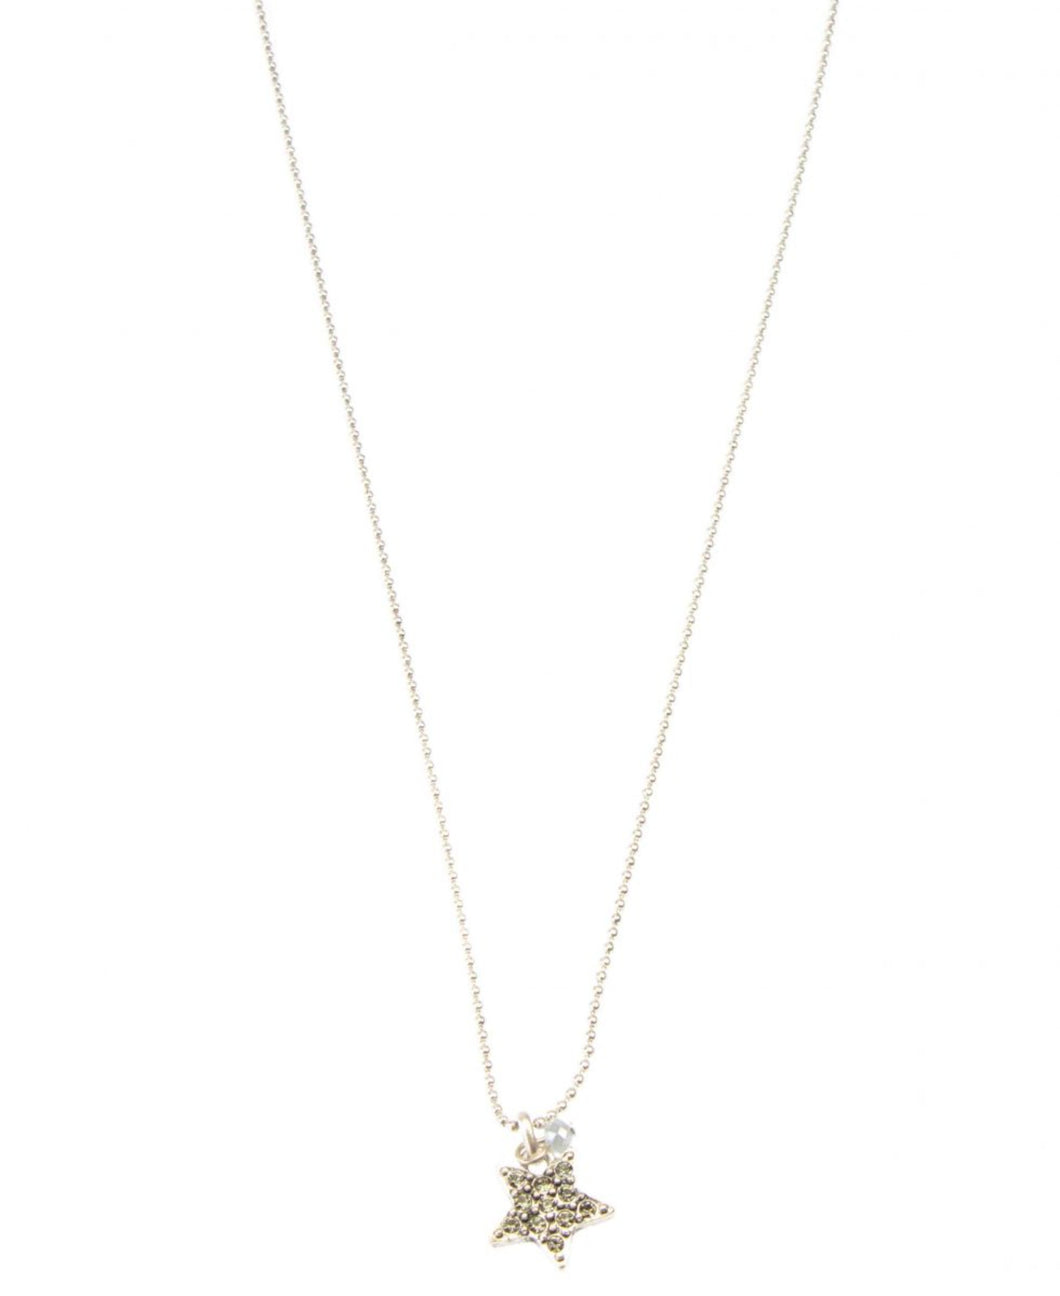 Hultquist Celestial Star Necklace